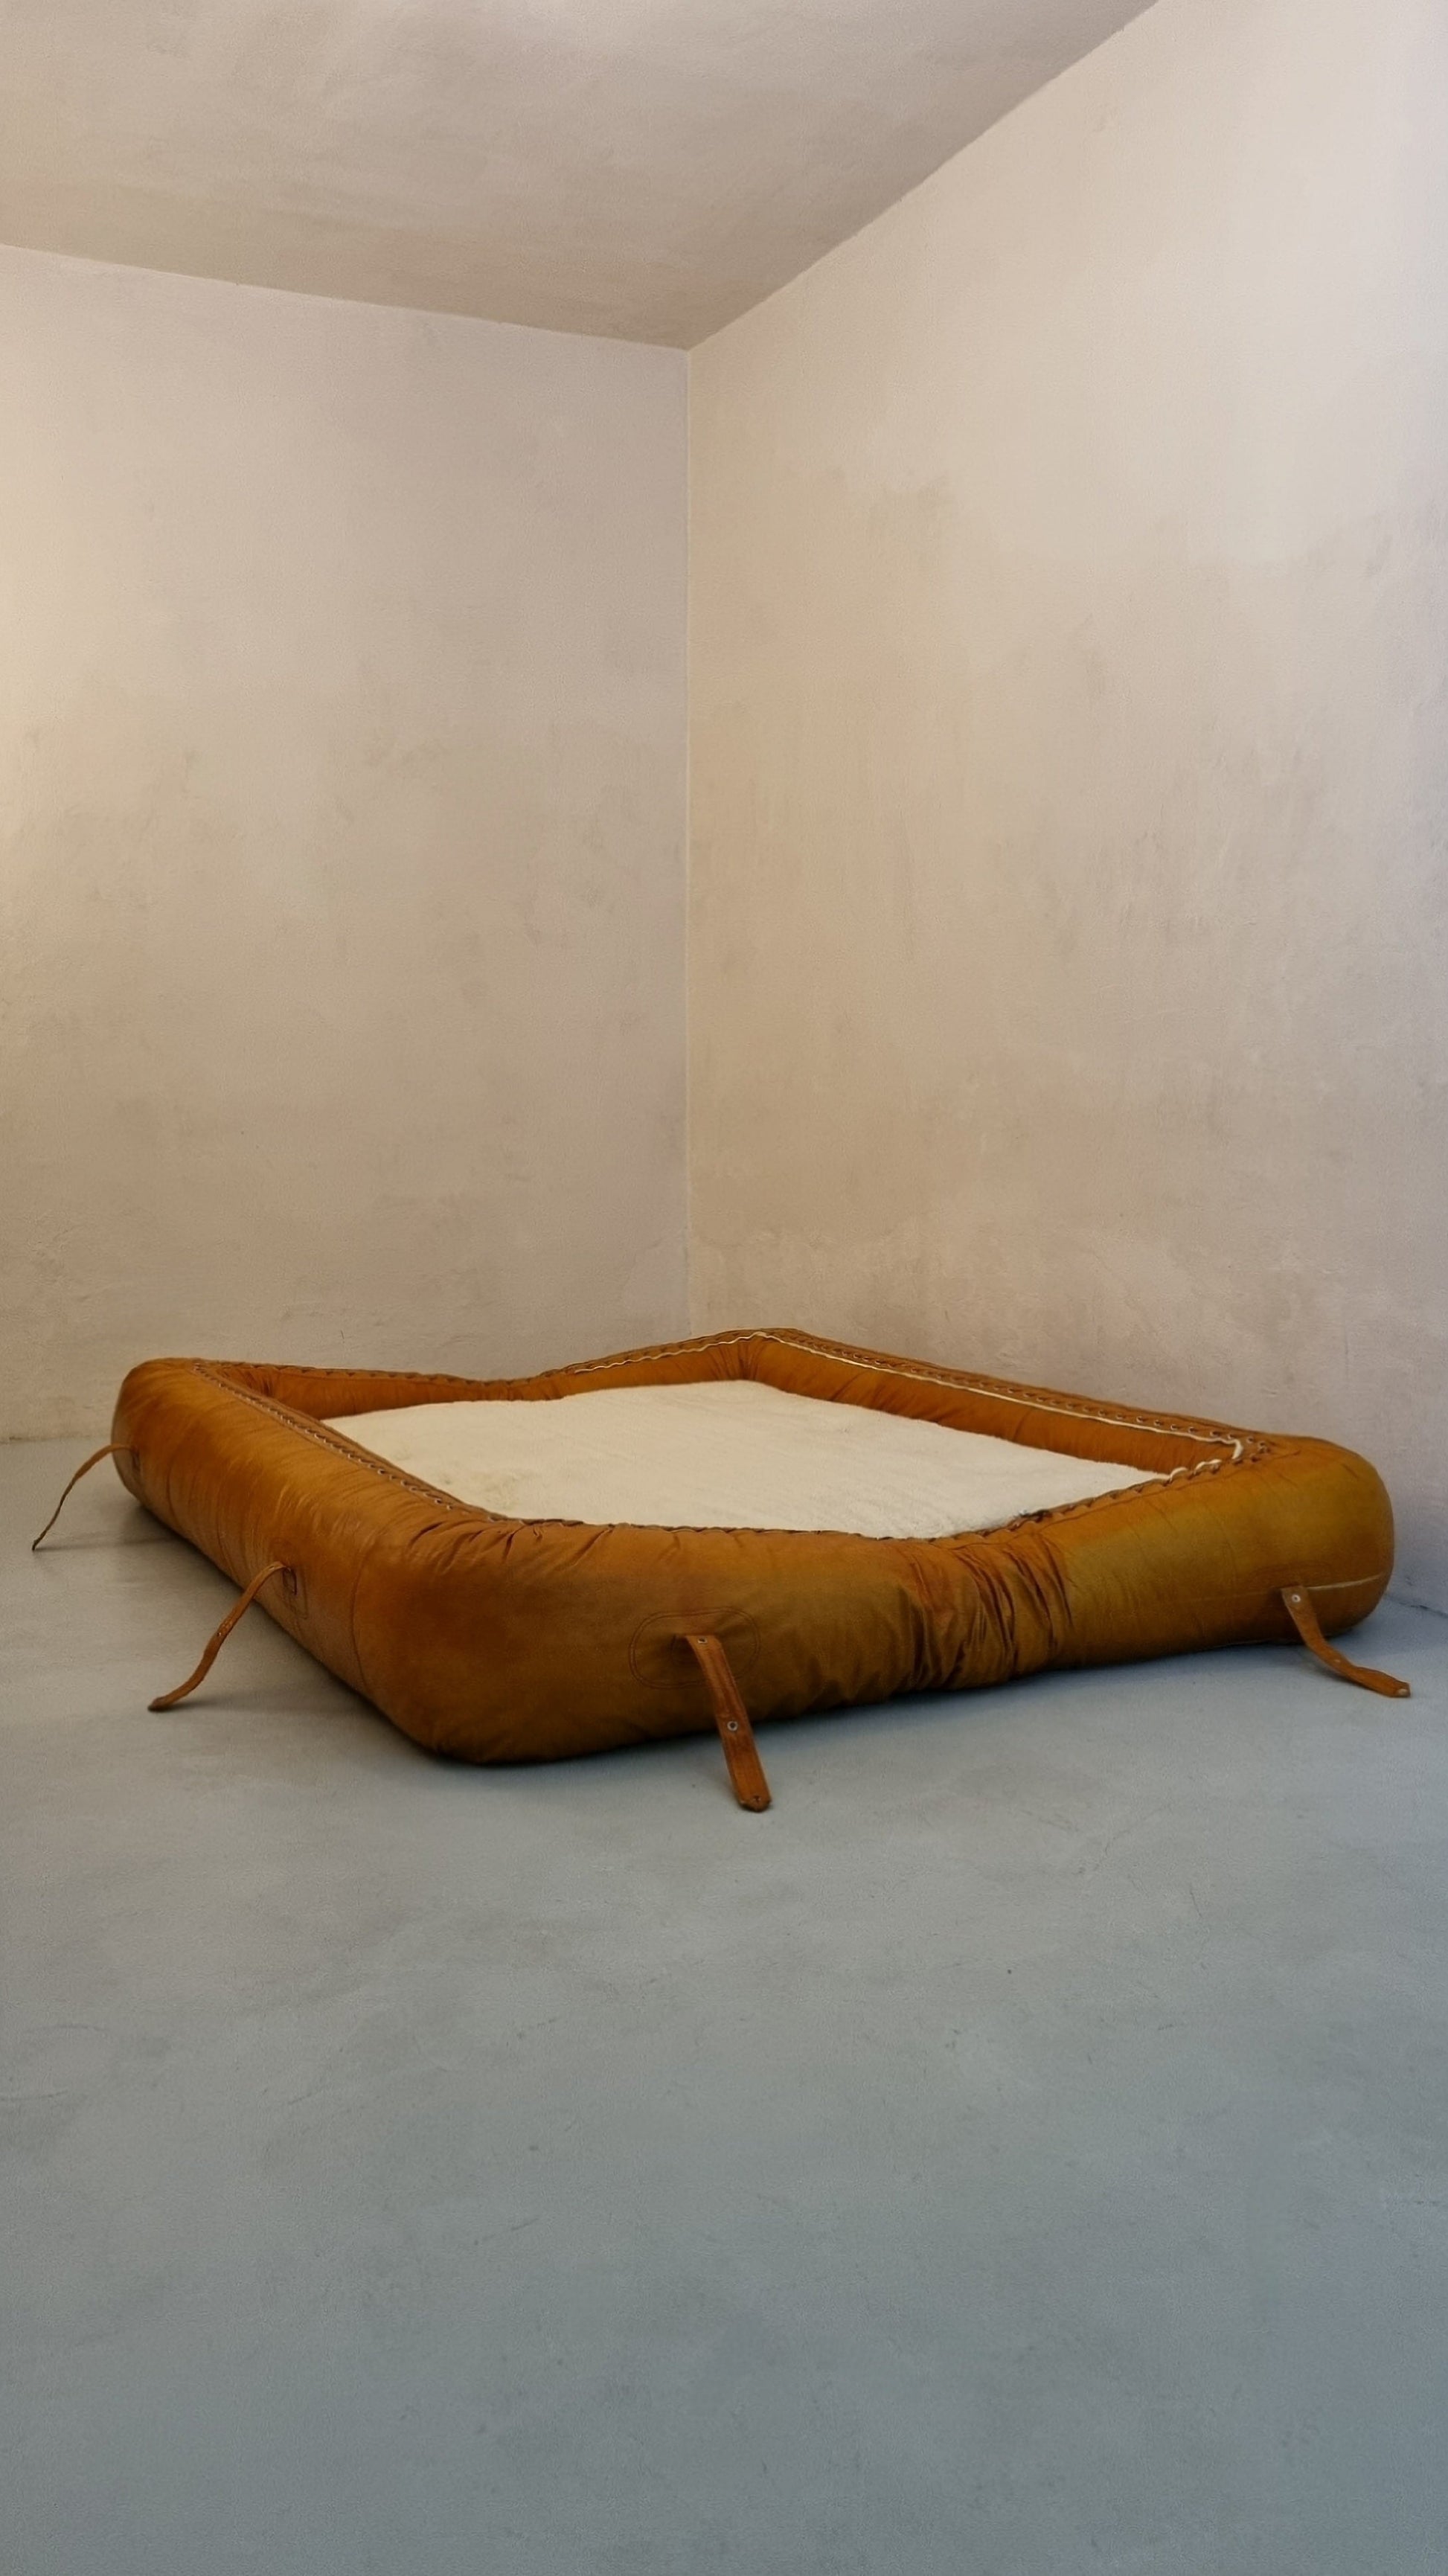 Anfibio Sofa Bed by Alessandro Becchi for Giovannetti Sofas Vintage